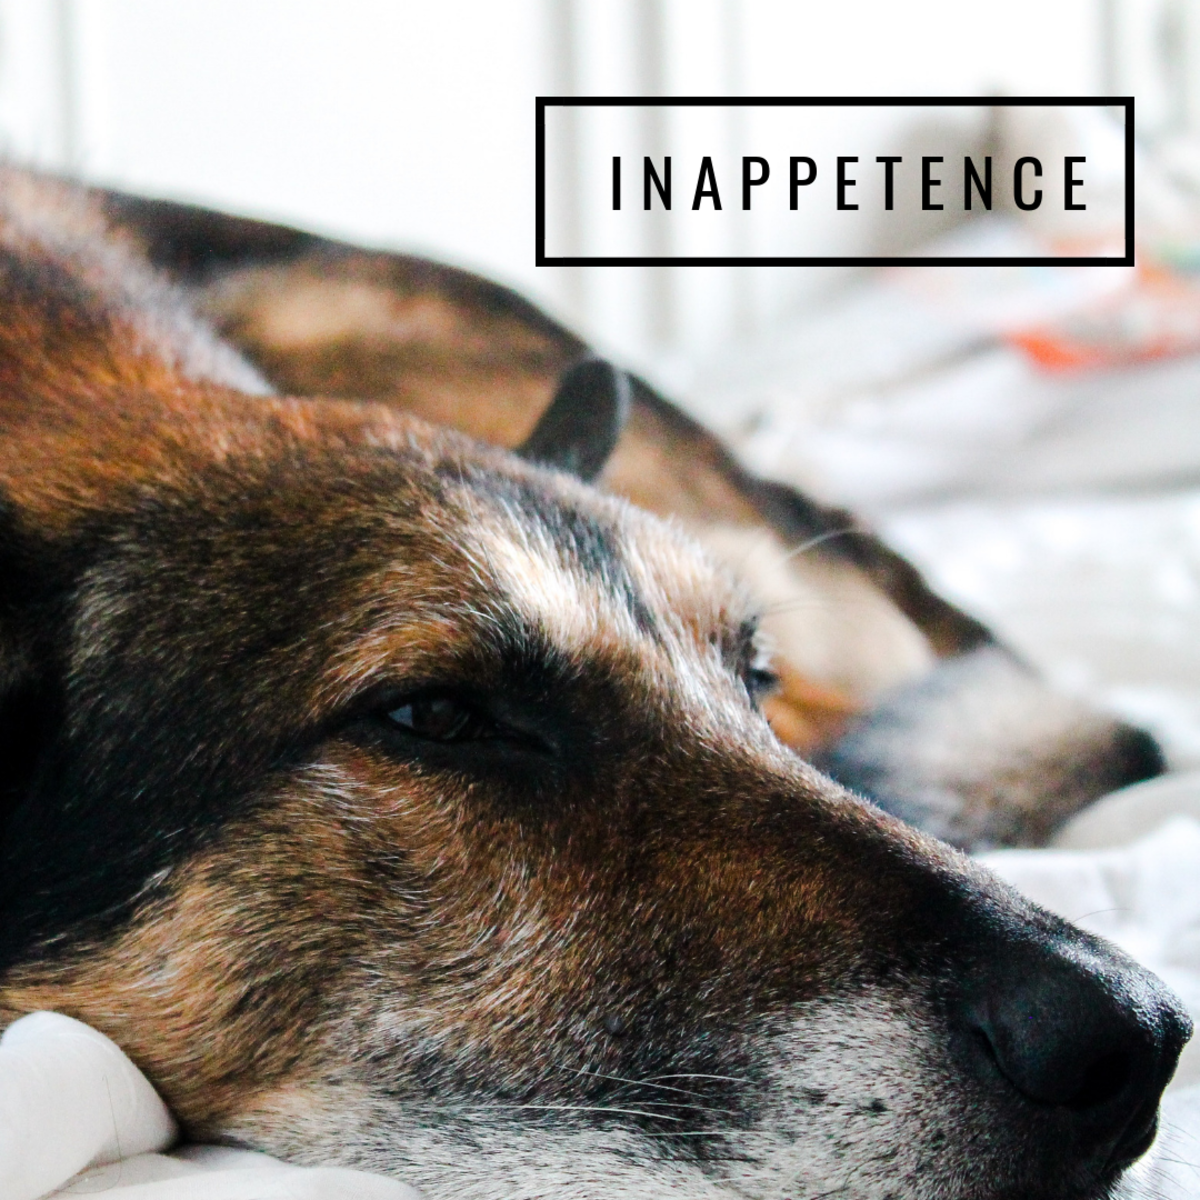 Inappetence is a common side effect of terminal or chronic illness and old age.